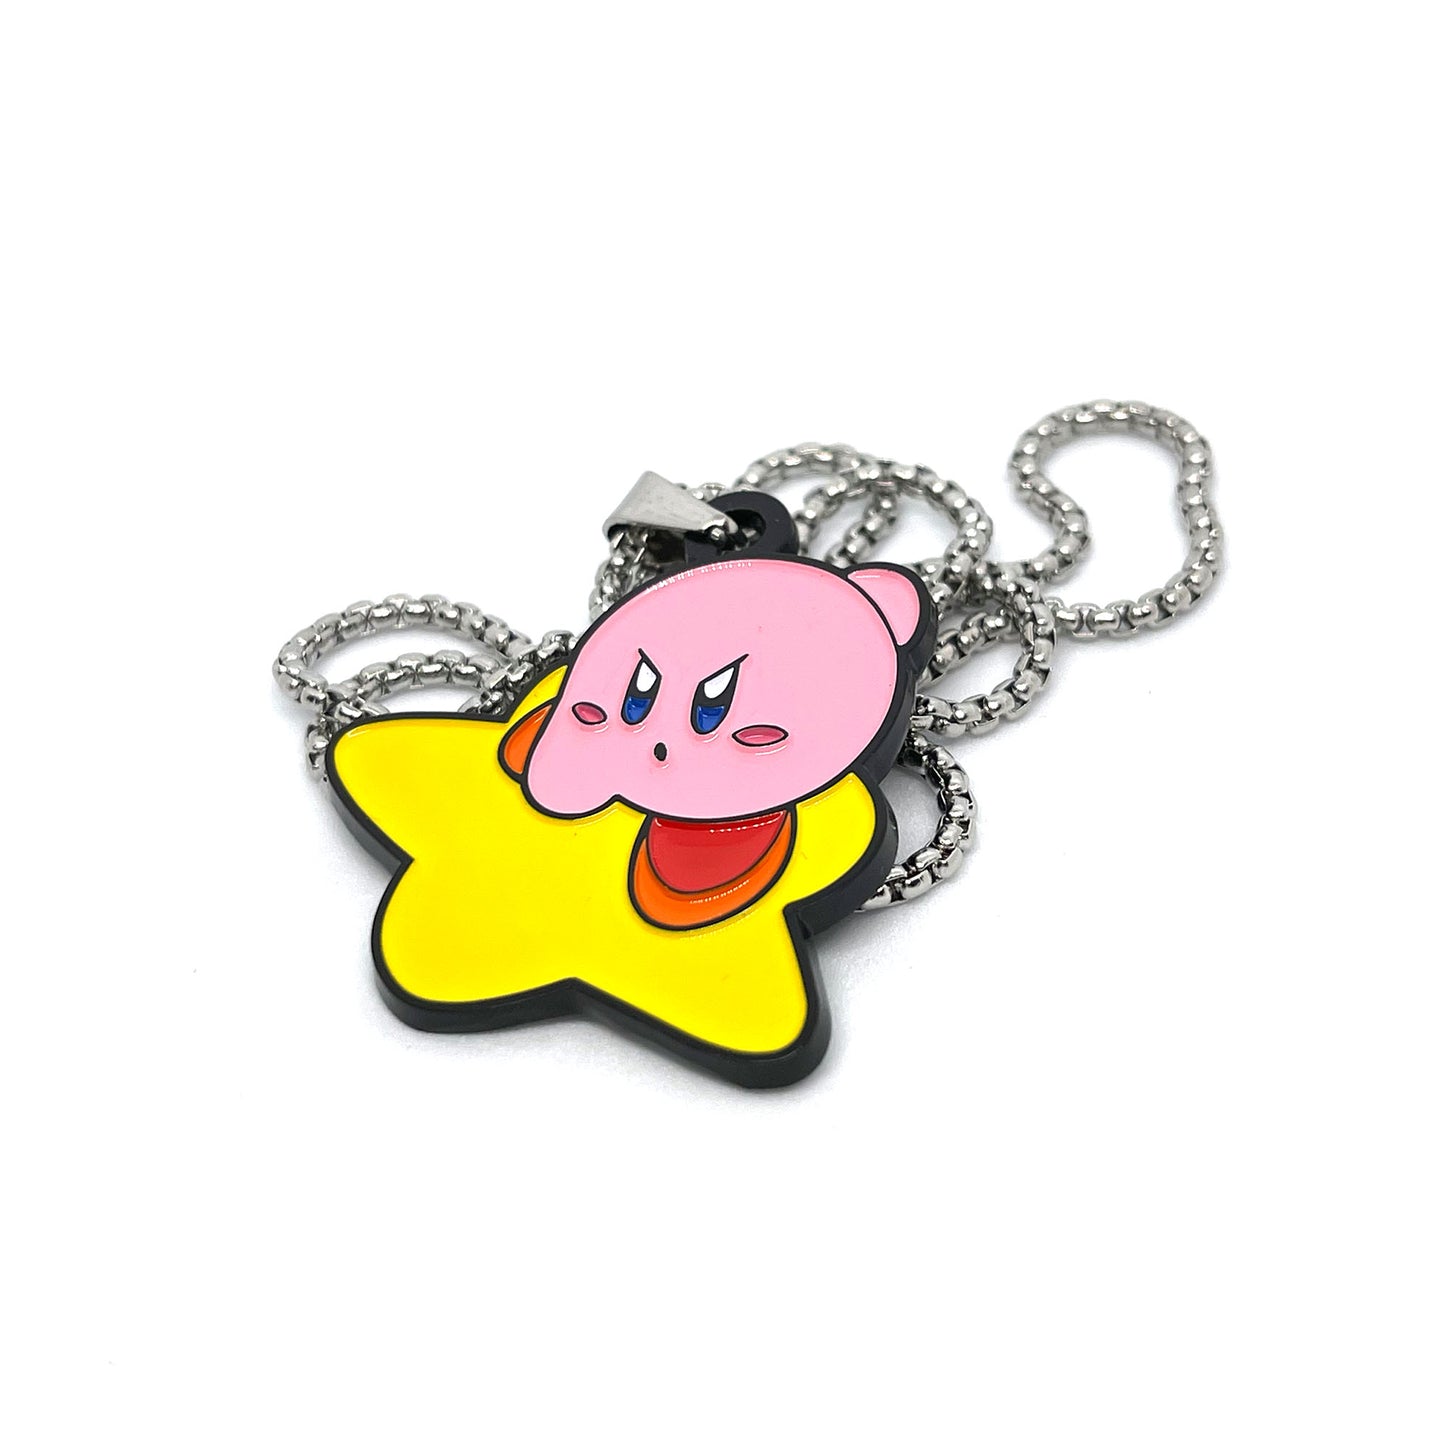 Kirby Air Ride Fan-Made Enamel Pendant Chain Necklace – 60cm Stainless Steel Chain